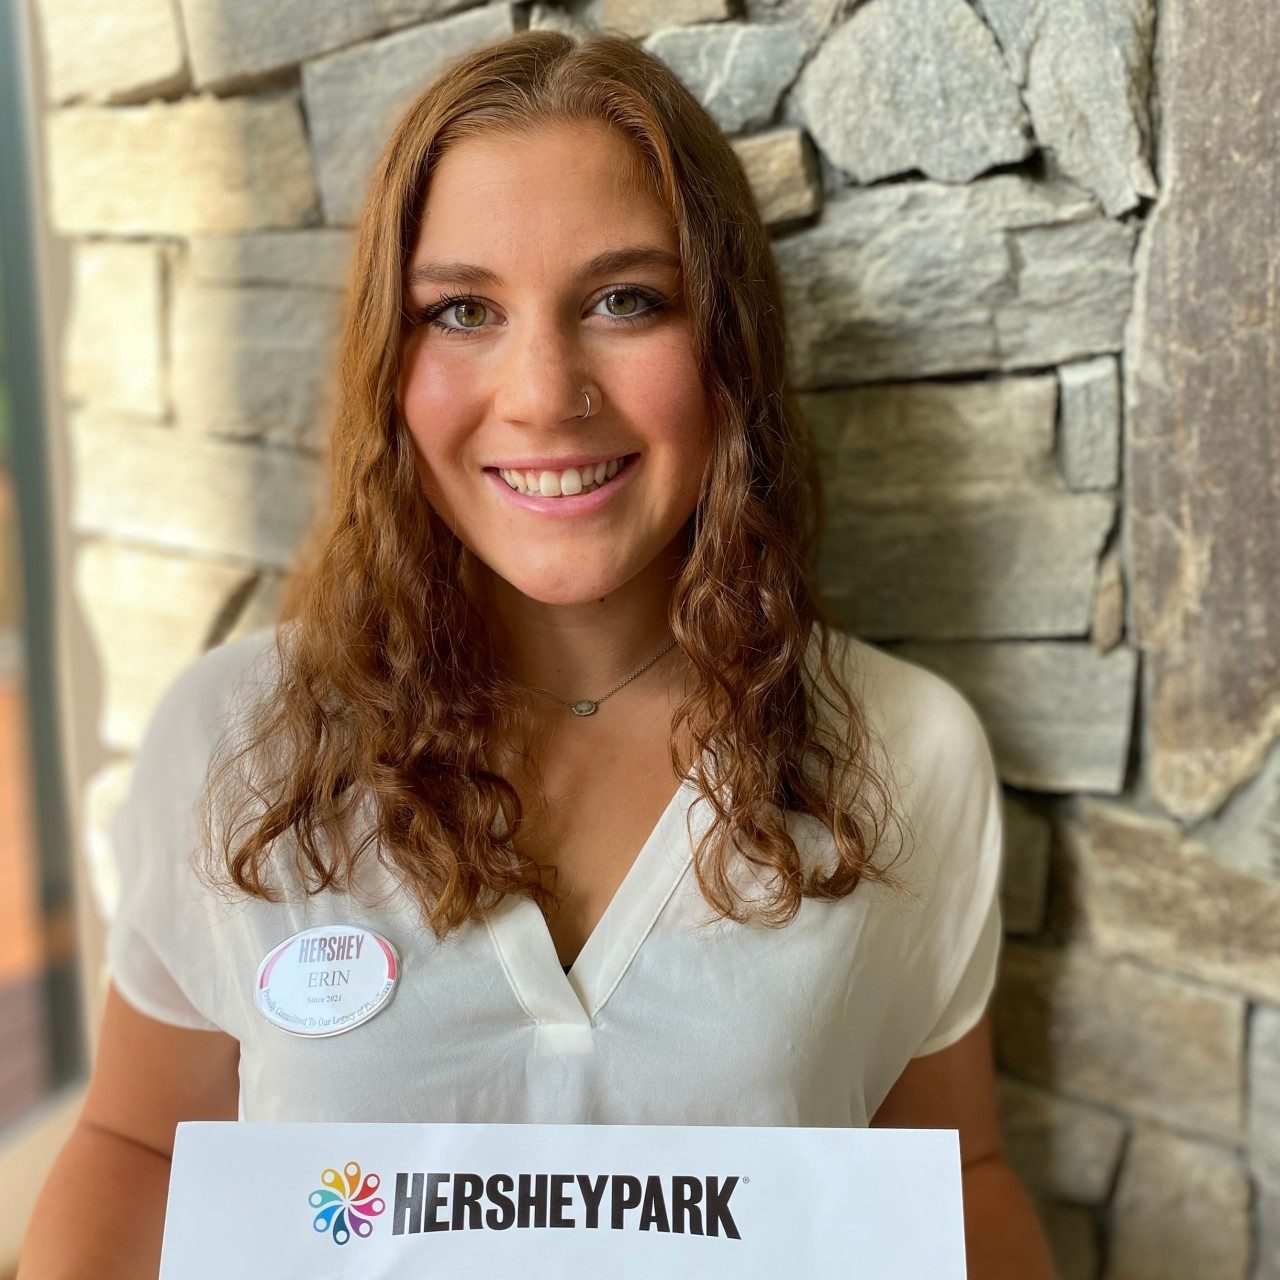  Erin interned at Hershey Entertainment and Resorts Company as a Leadership Development Intern and Team Leader for the Food and Beverage Department. Working within world-class entertainment and hospitality provided leadership and networking opportunities. Erin was able to shadow management positions and support various events. This opportunity boosted her confidence and helped prepare her for the workforce after graduation. 